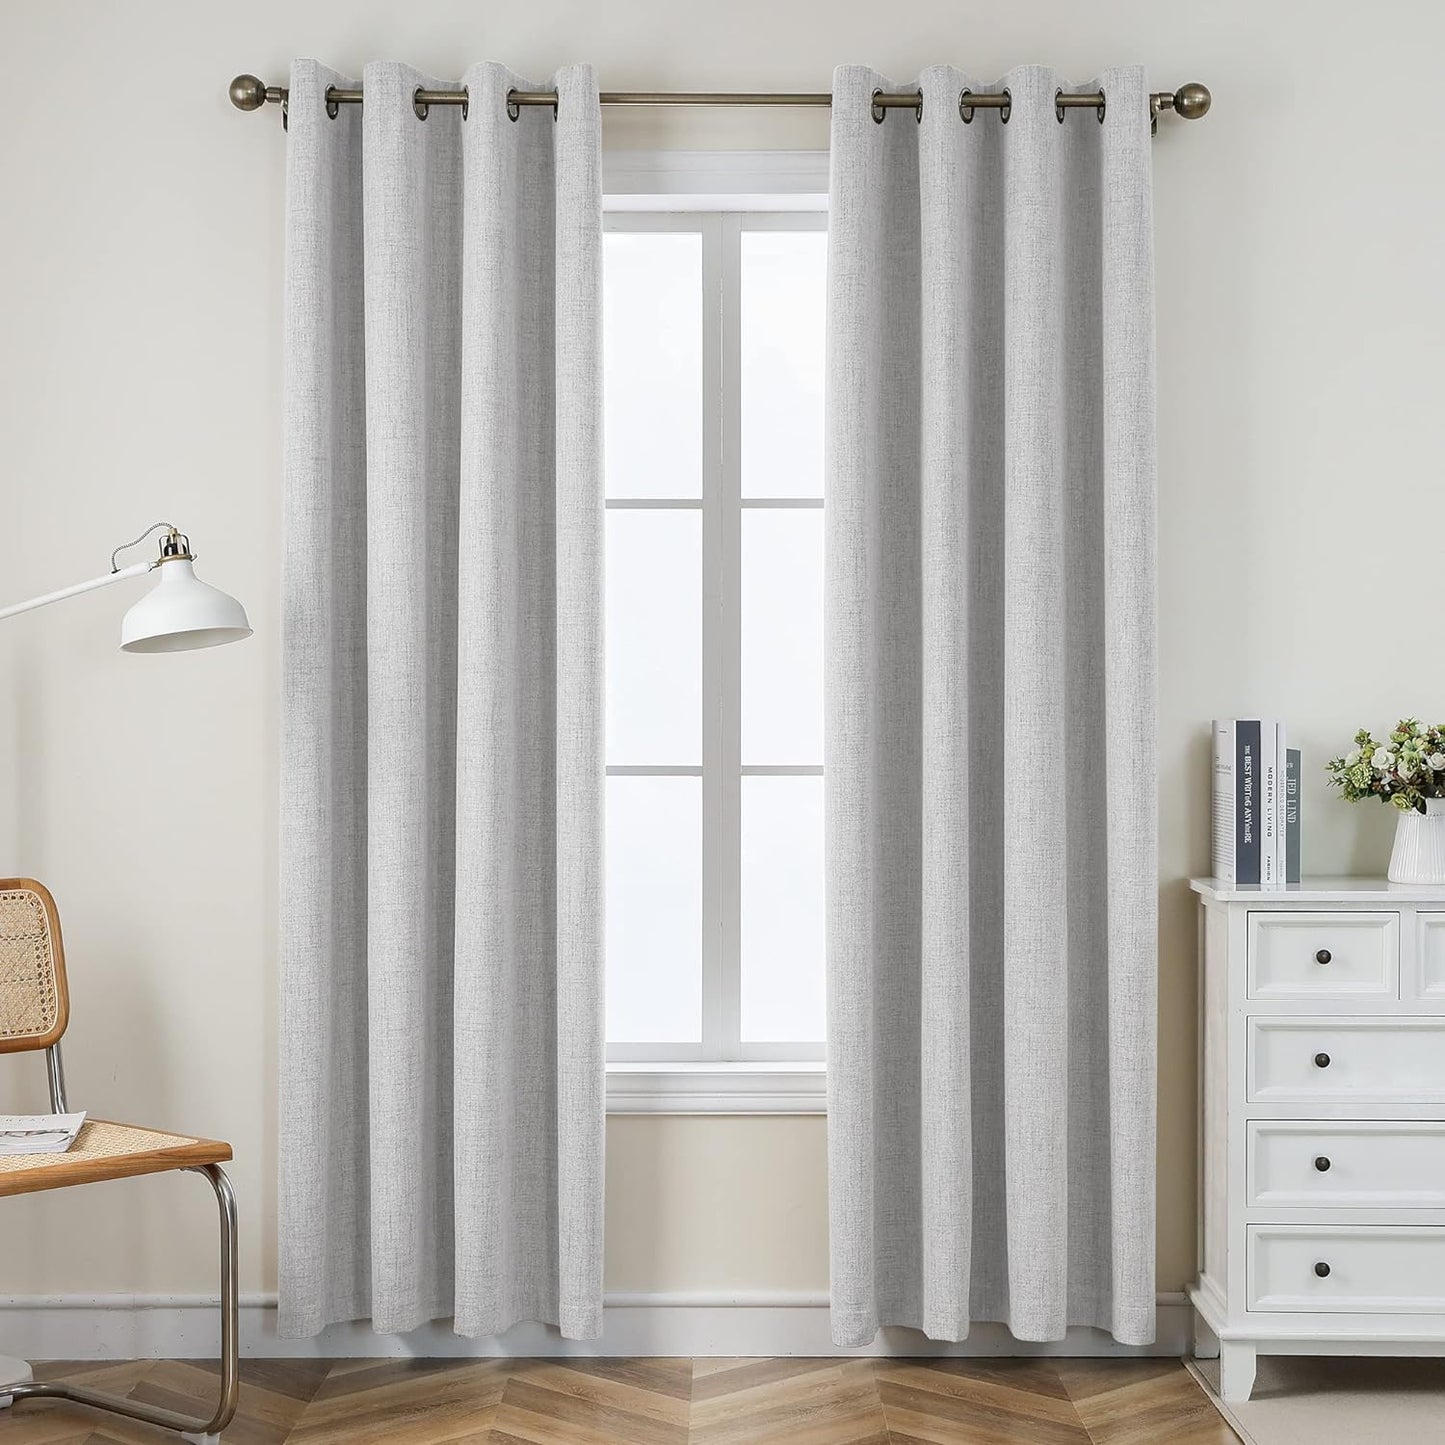 CUCRAF Full Blackout Window Curtains 84 Inches Long,Faux Linen Look Thermal Insulated Grommet Drapes Panels for Bedroom Living Room,Set of 2(52 X 84 Inches, Light Khaki)  CUCRAF White 52 X 72 Inches 